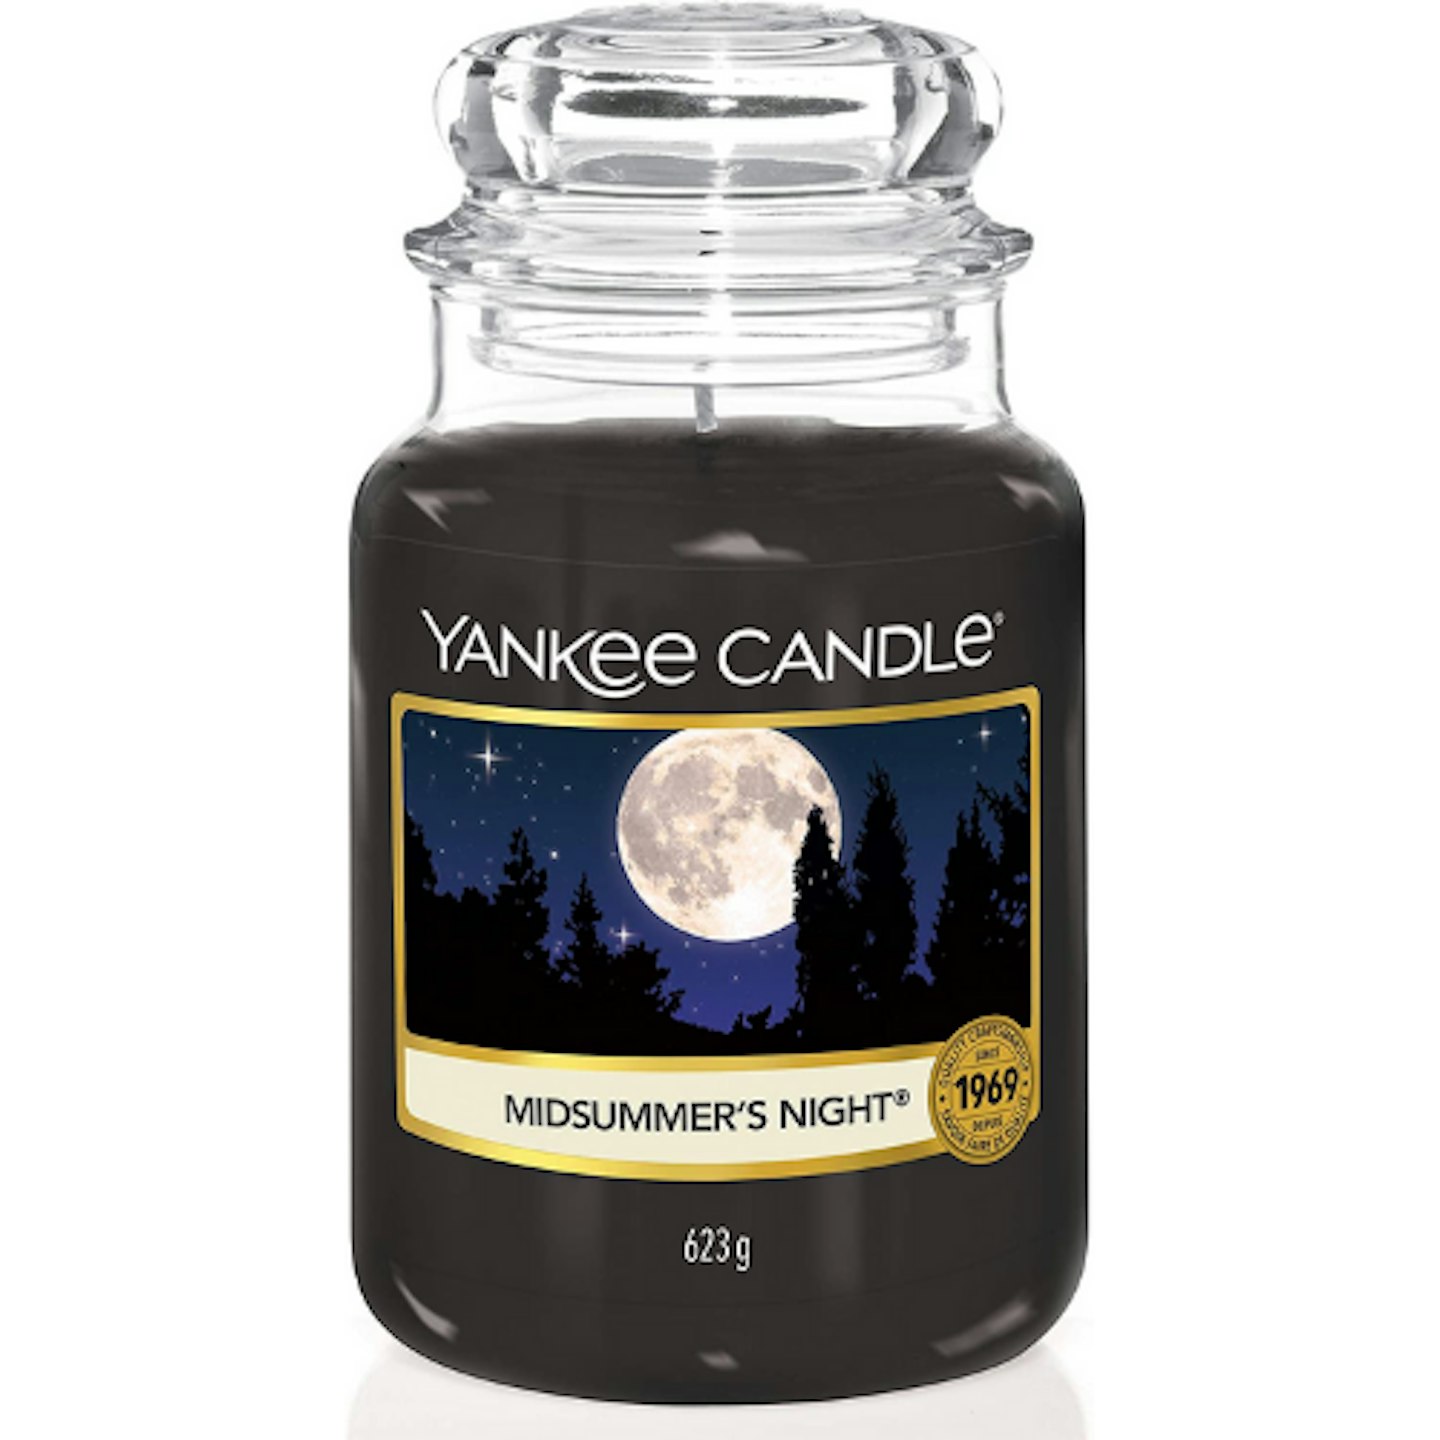 Best Yankee Candle deals: Yankee Candle Midsummer's Night Large Jar Candle